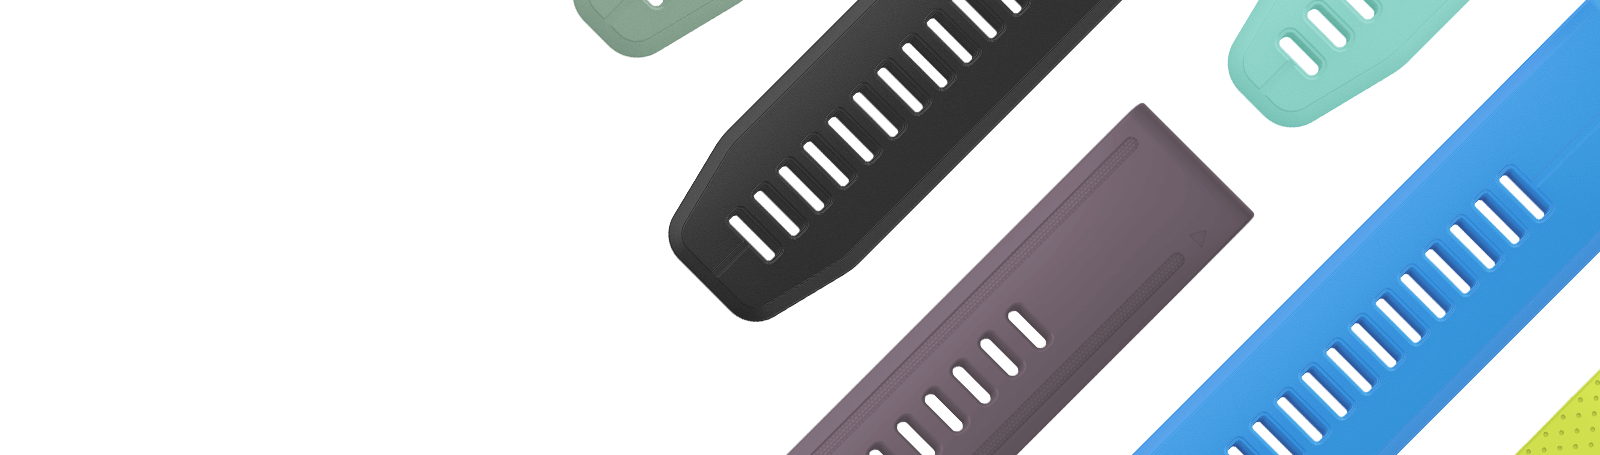 Collection of stylish watch bands.